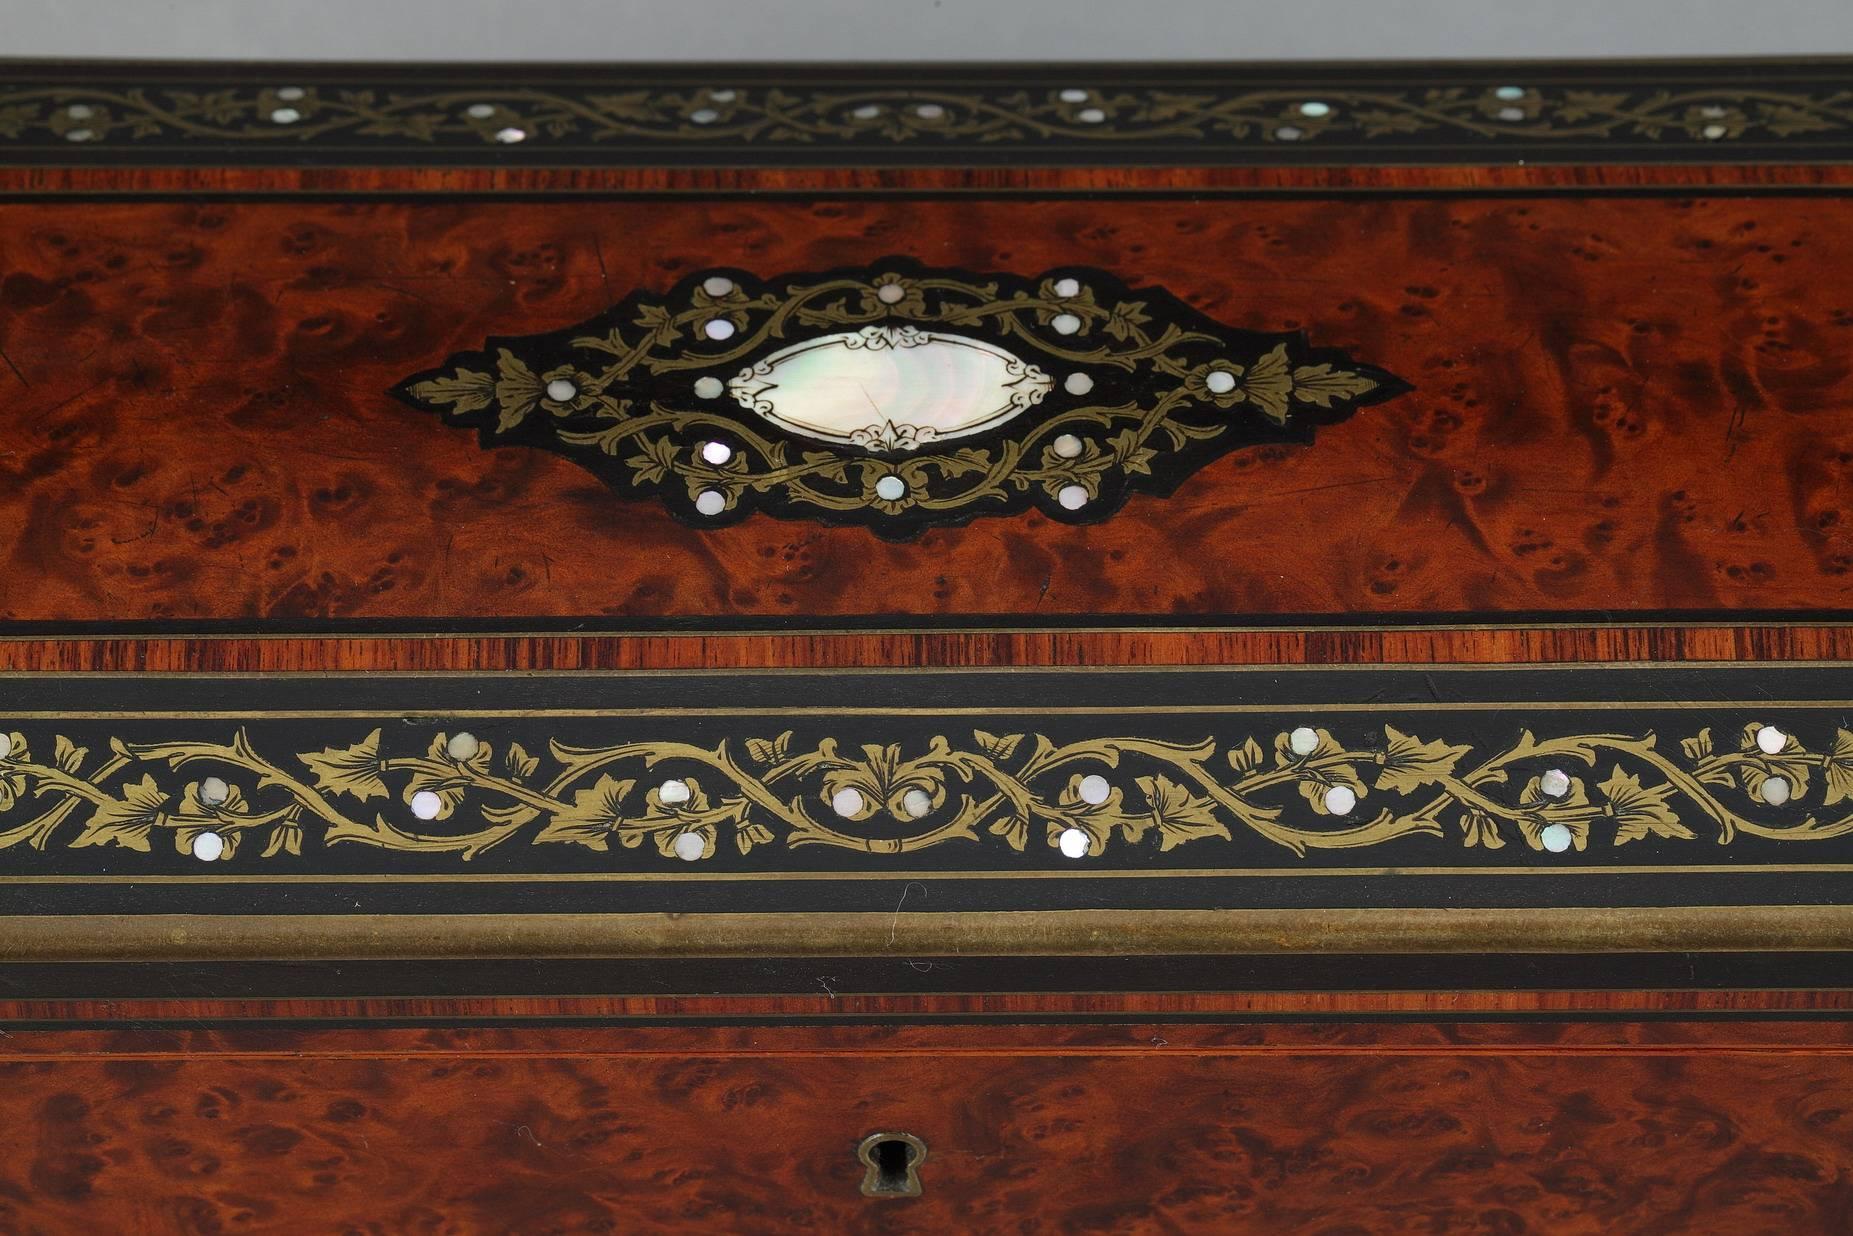 Octagonal-shaped?casket?in wood, the drop-leaf lid is decorated with brass and mother-of-pearl inlay featuring a central medallion and foliated interlace. The interior is composed of a compartment lined with blue fabric that has some traces of use.